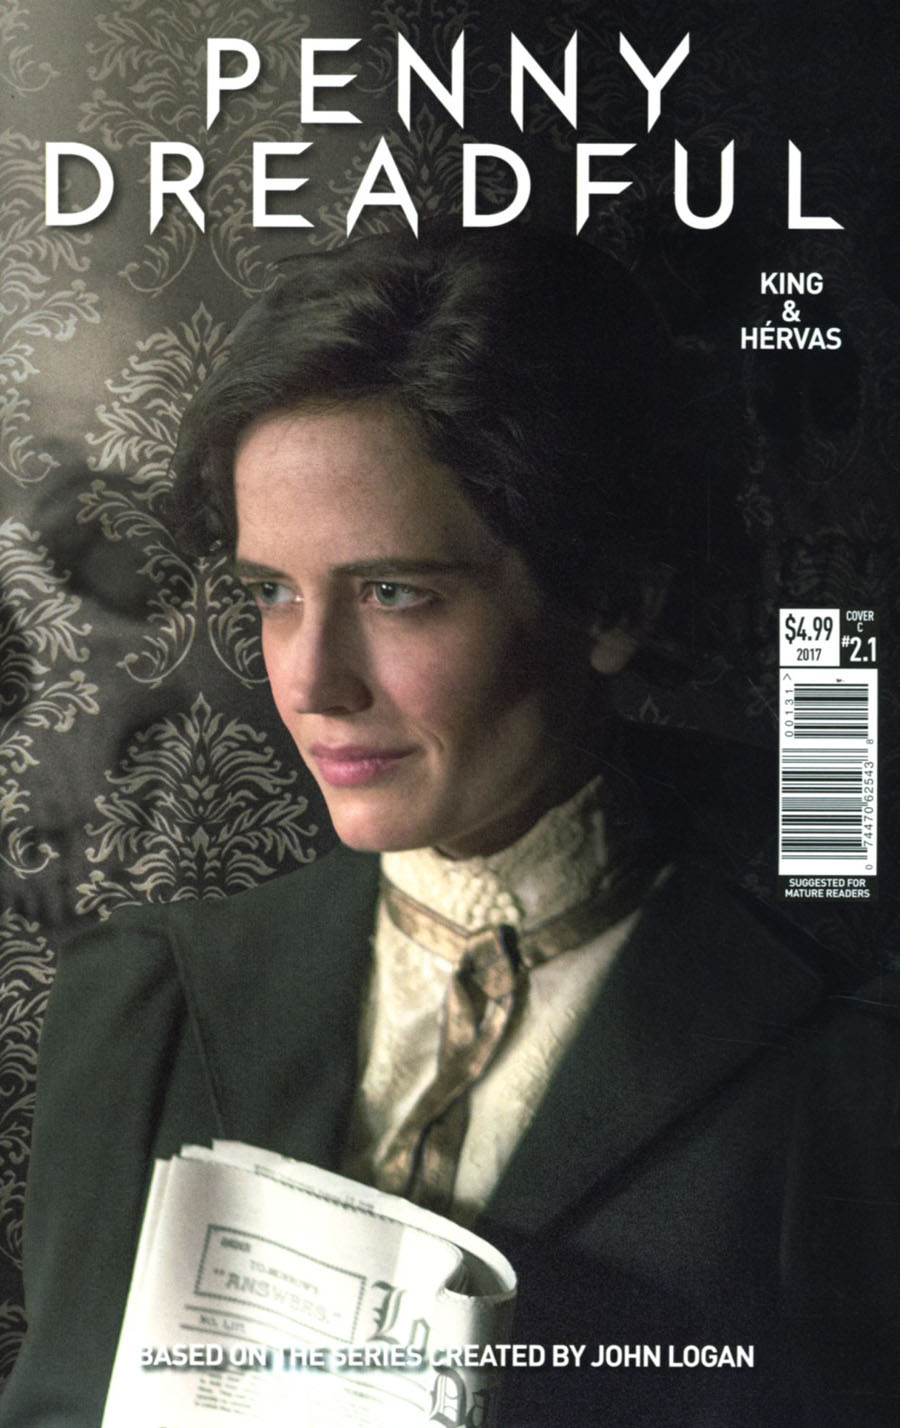 Penny Dreadful Vol 2 #1 Cover C Variant Photo Cover